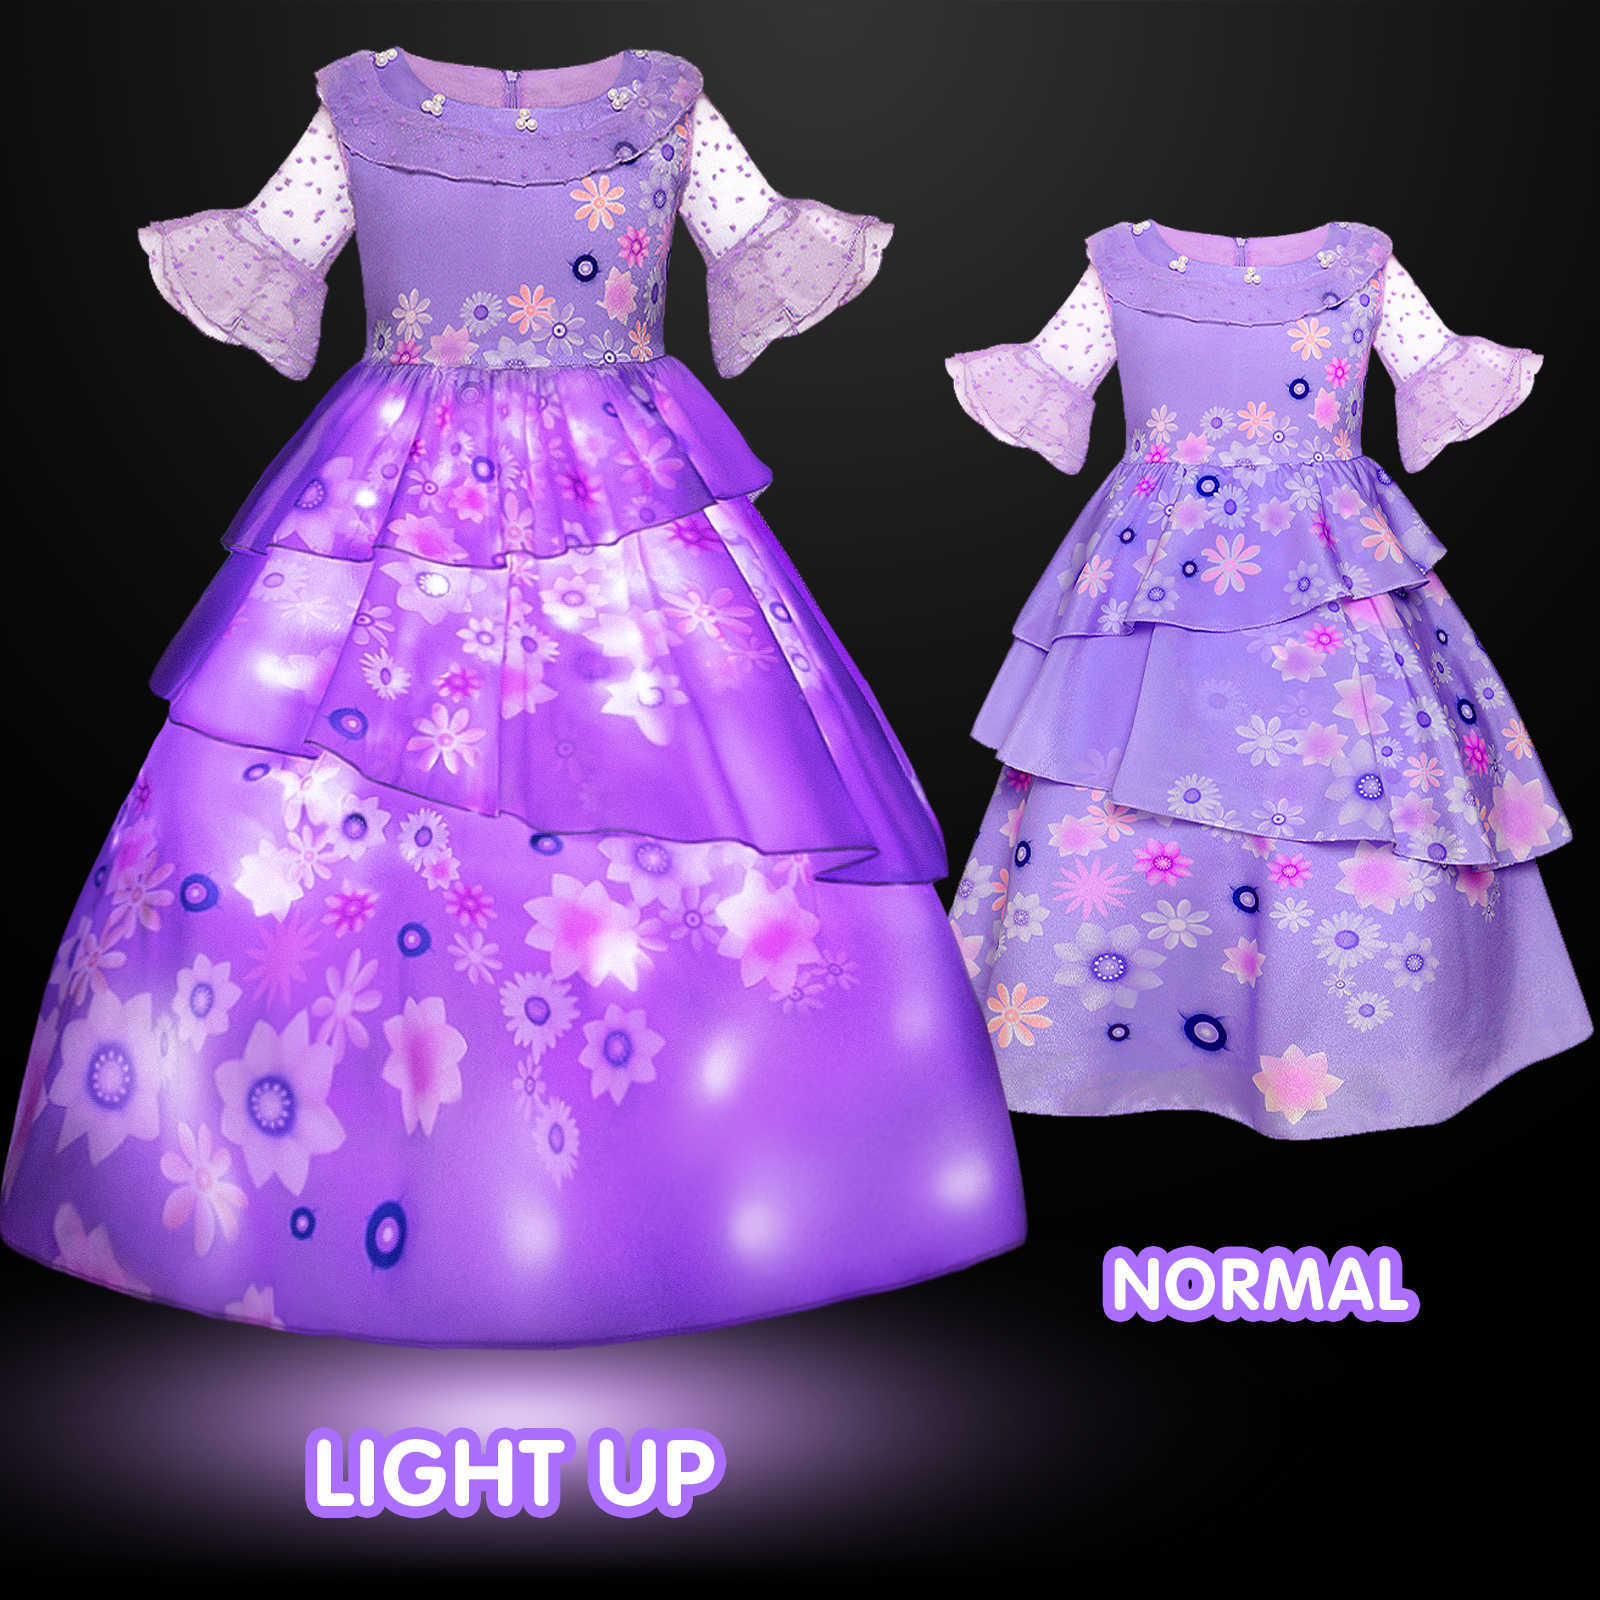 Girl's Dresses Uporpor Encanto Costume Princess LED Light Up Dress Glamour Girl Cosplay Isabela Mirabell Christmas Birthday Party Gown